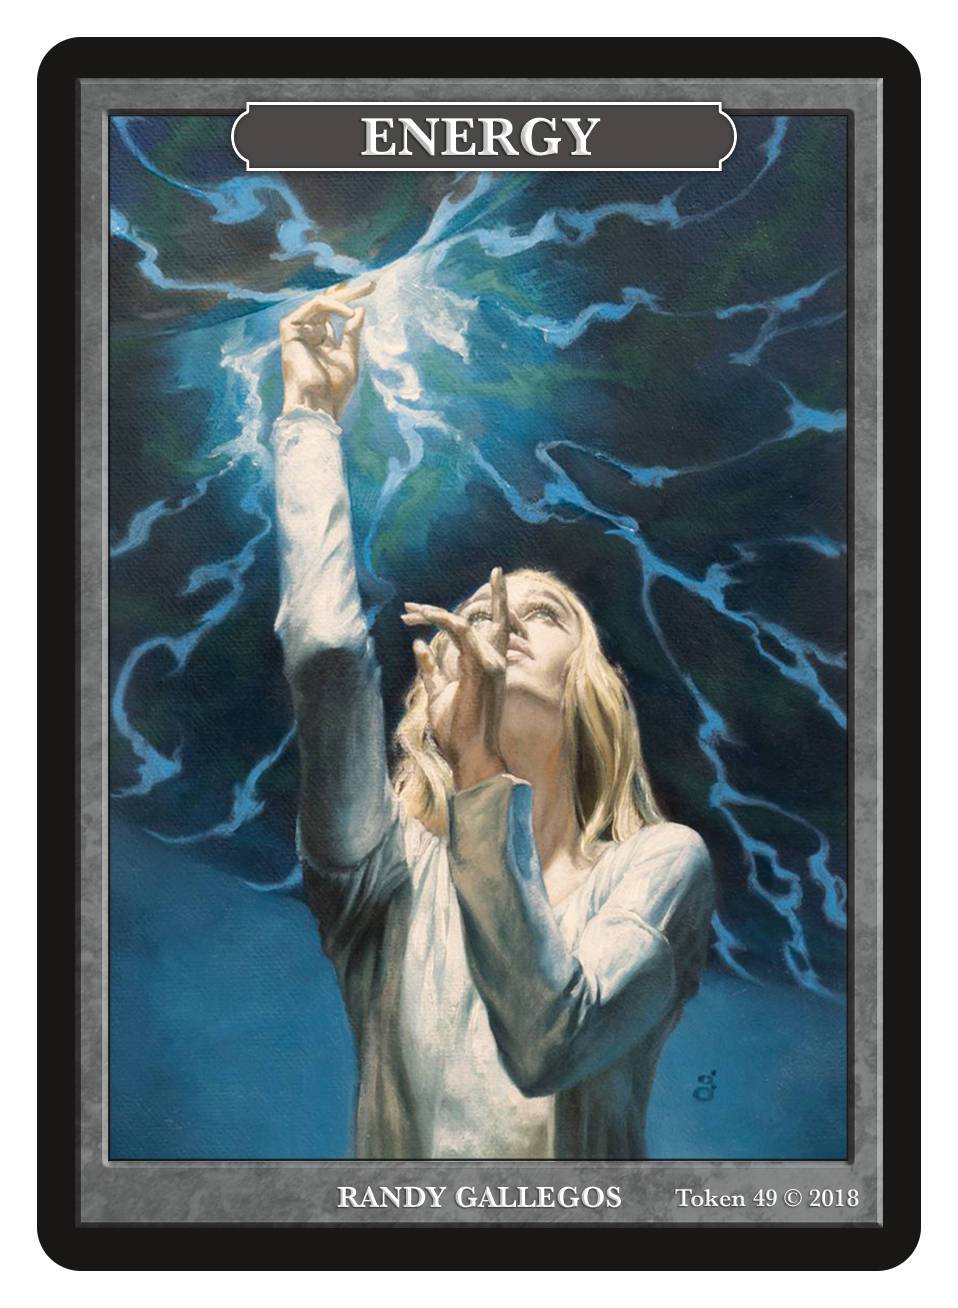 Energy Token by Randy Gallegos - Token - Original Magic Art - Accessories for Magic the Gathering and other card games